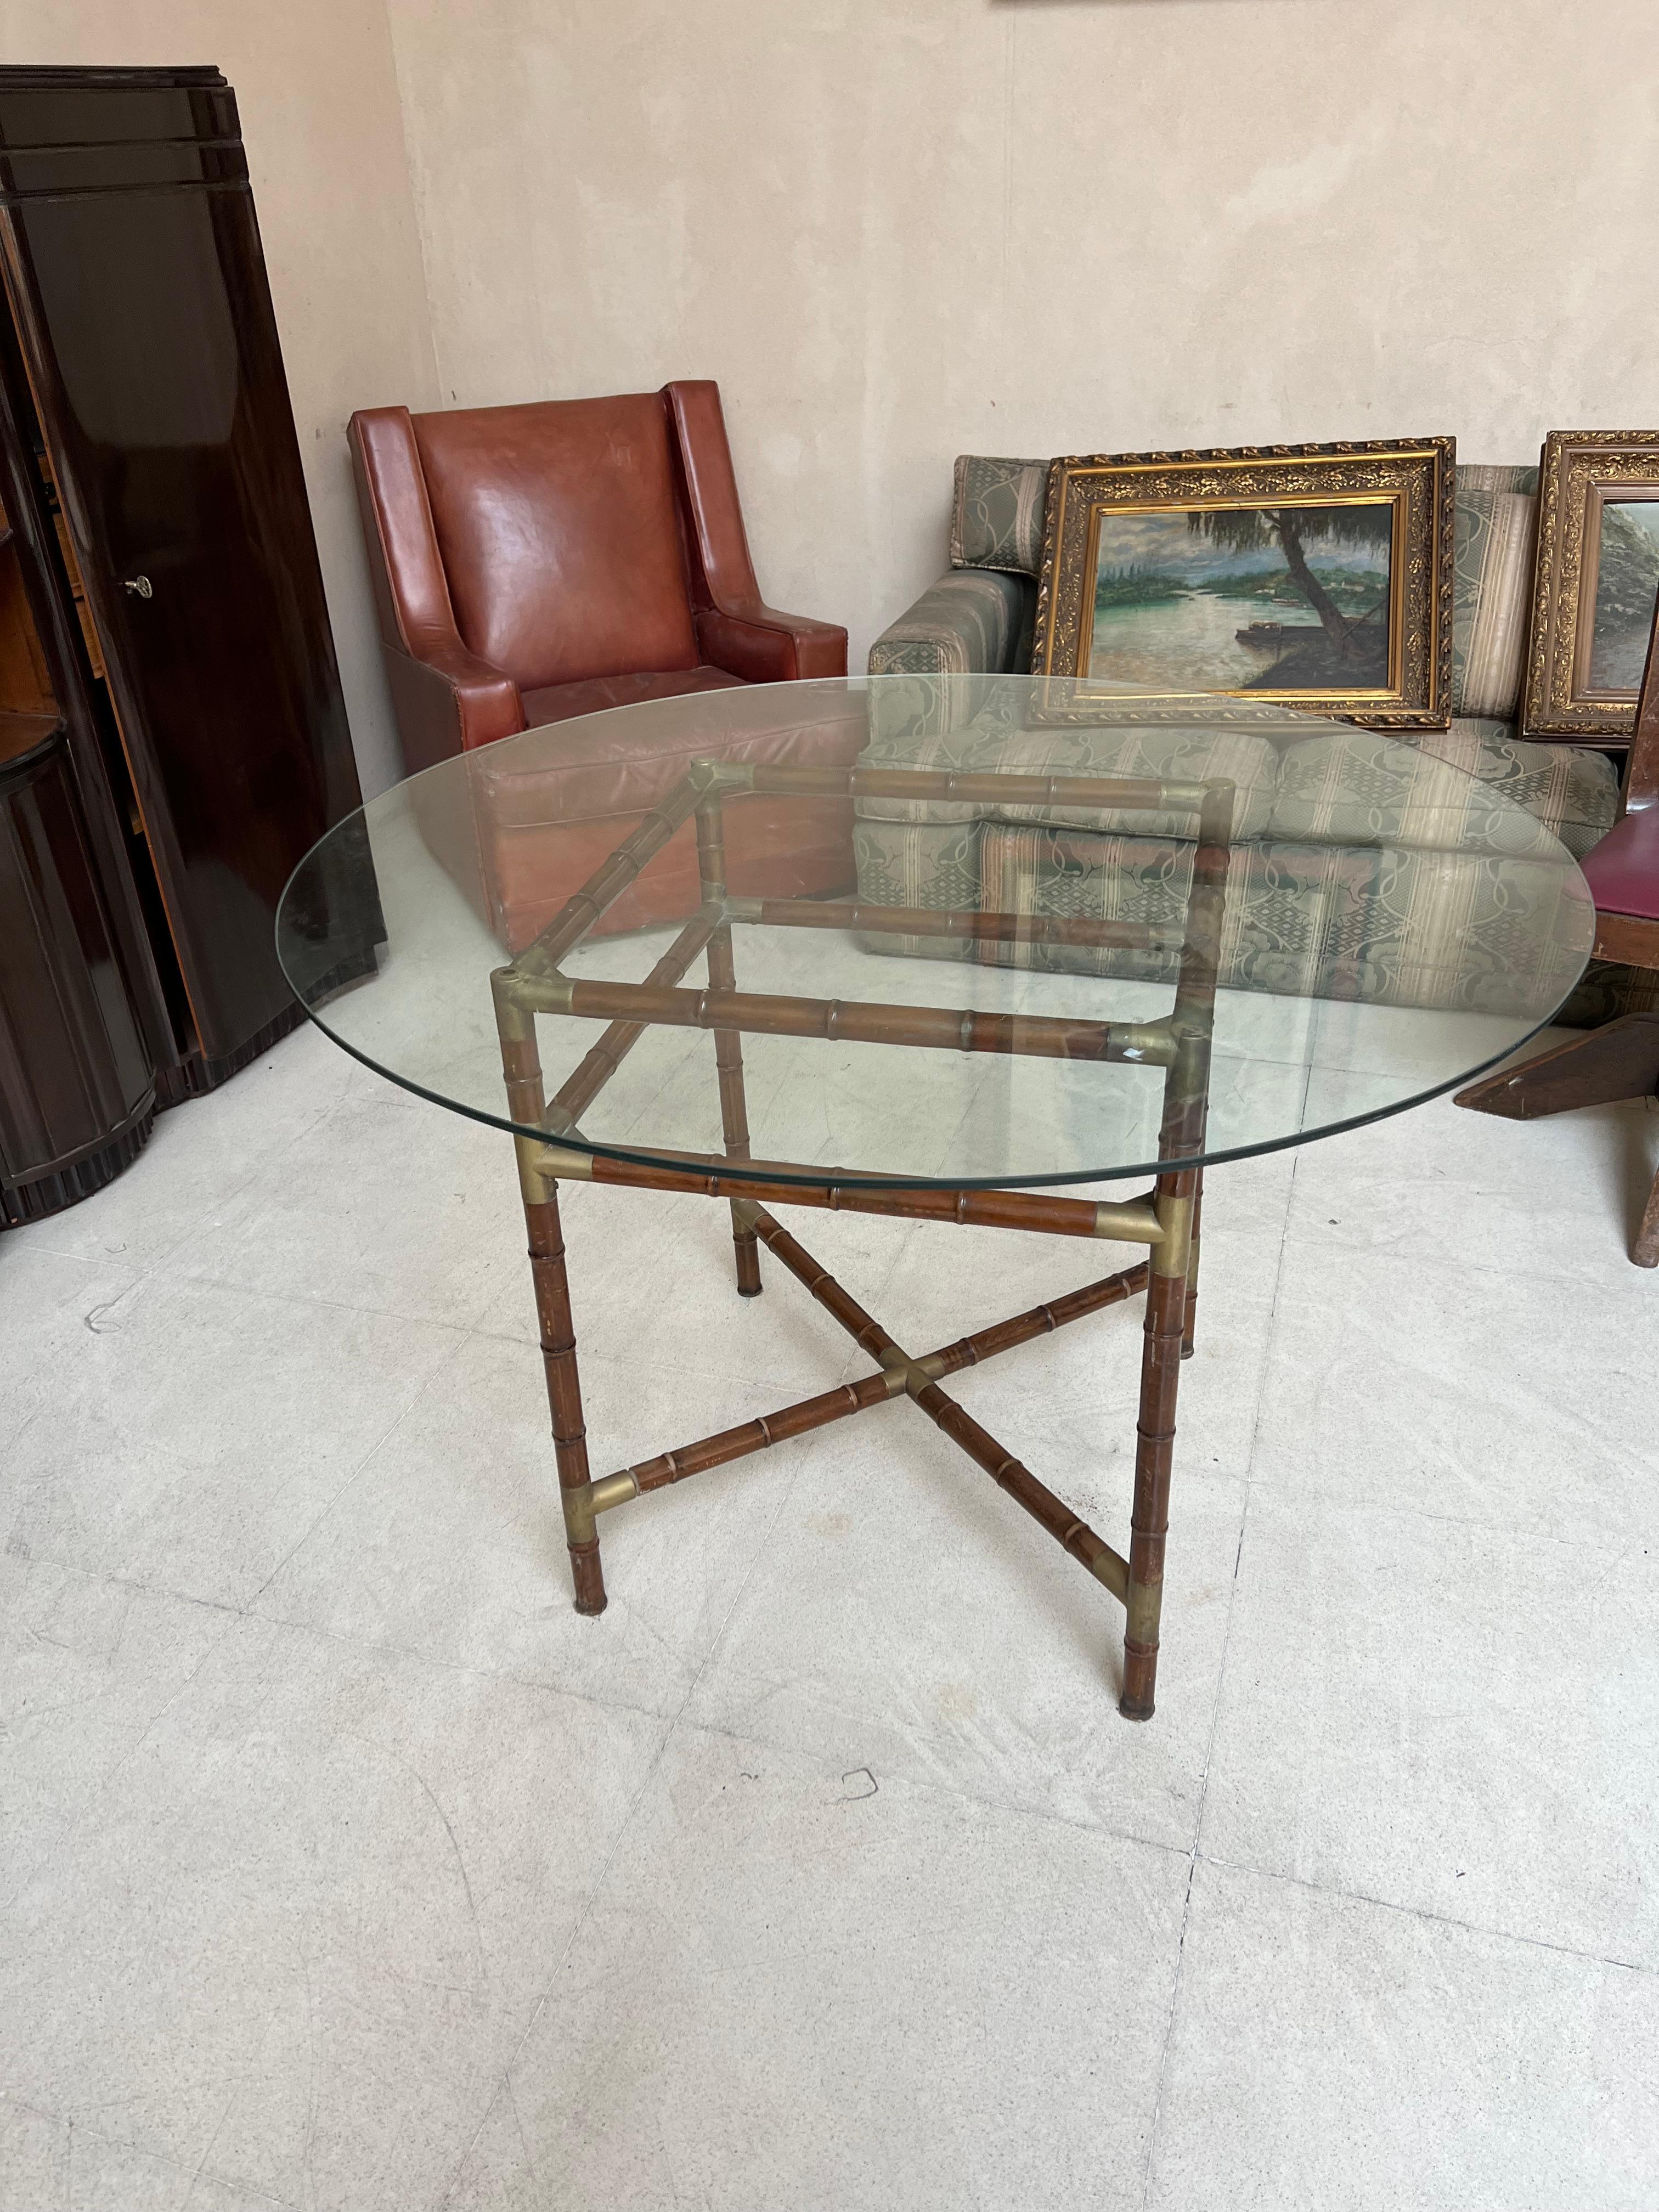 Dining table Art Deco with extension board.

Year: 1960
Country: American
Wood and parchment (leather)
It is an elegant and sophisticated dining table.
You want to live in the golden years, this is the dining table that your project needs.
We have